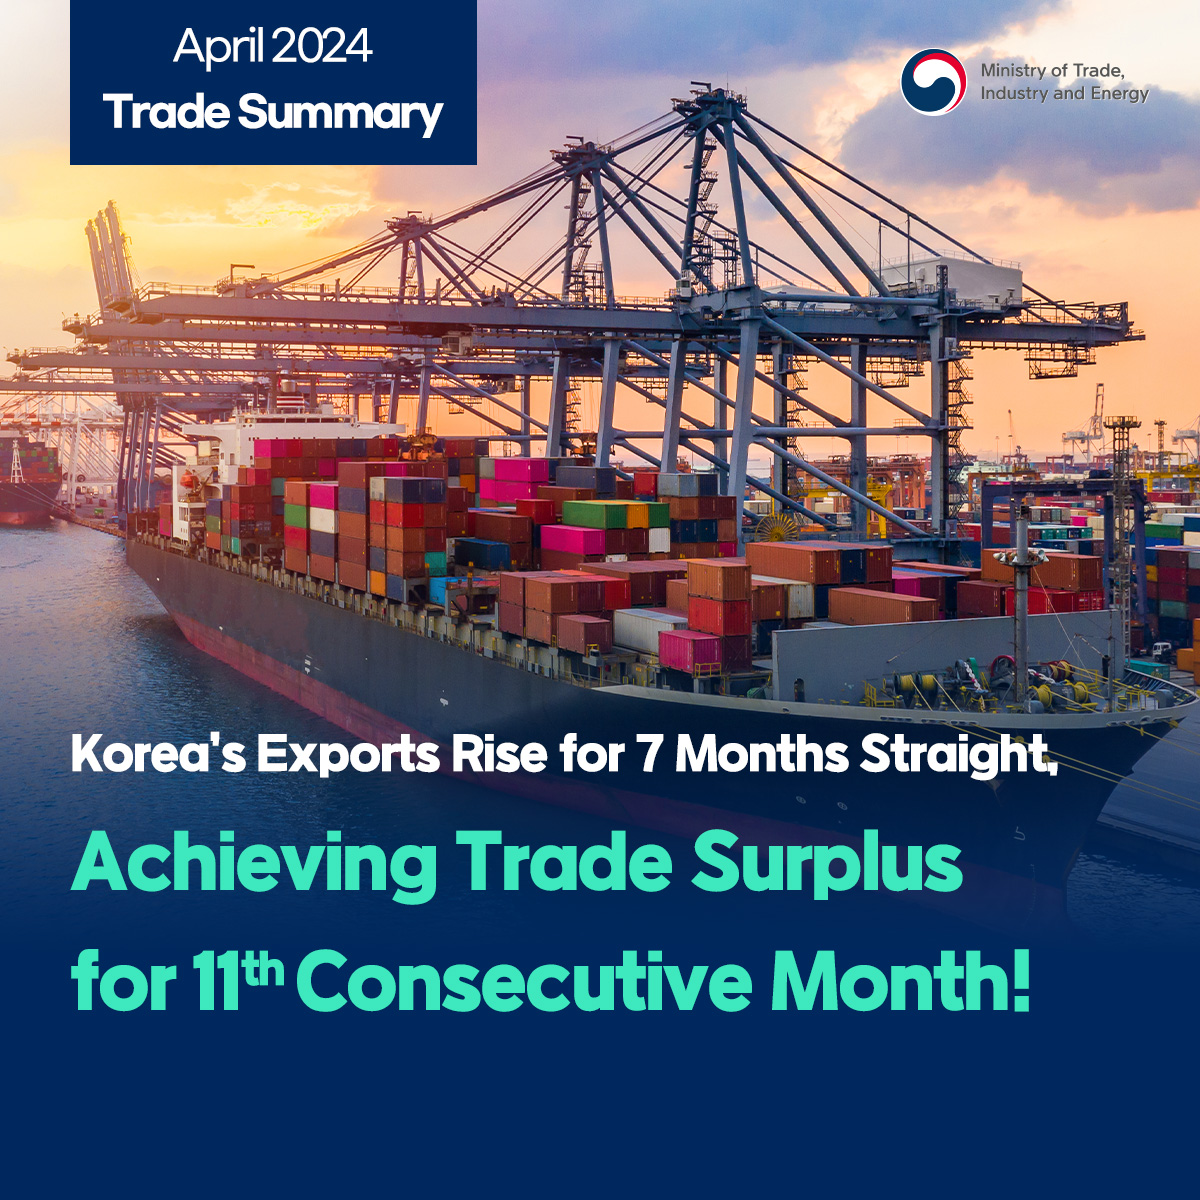 Korea achieves trade surplus for 11th consecutive month!